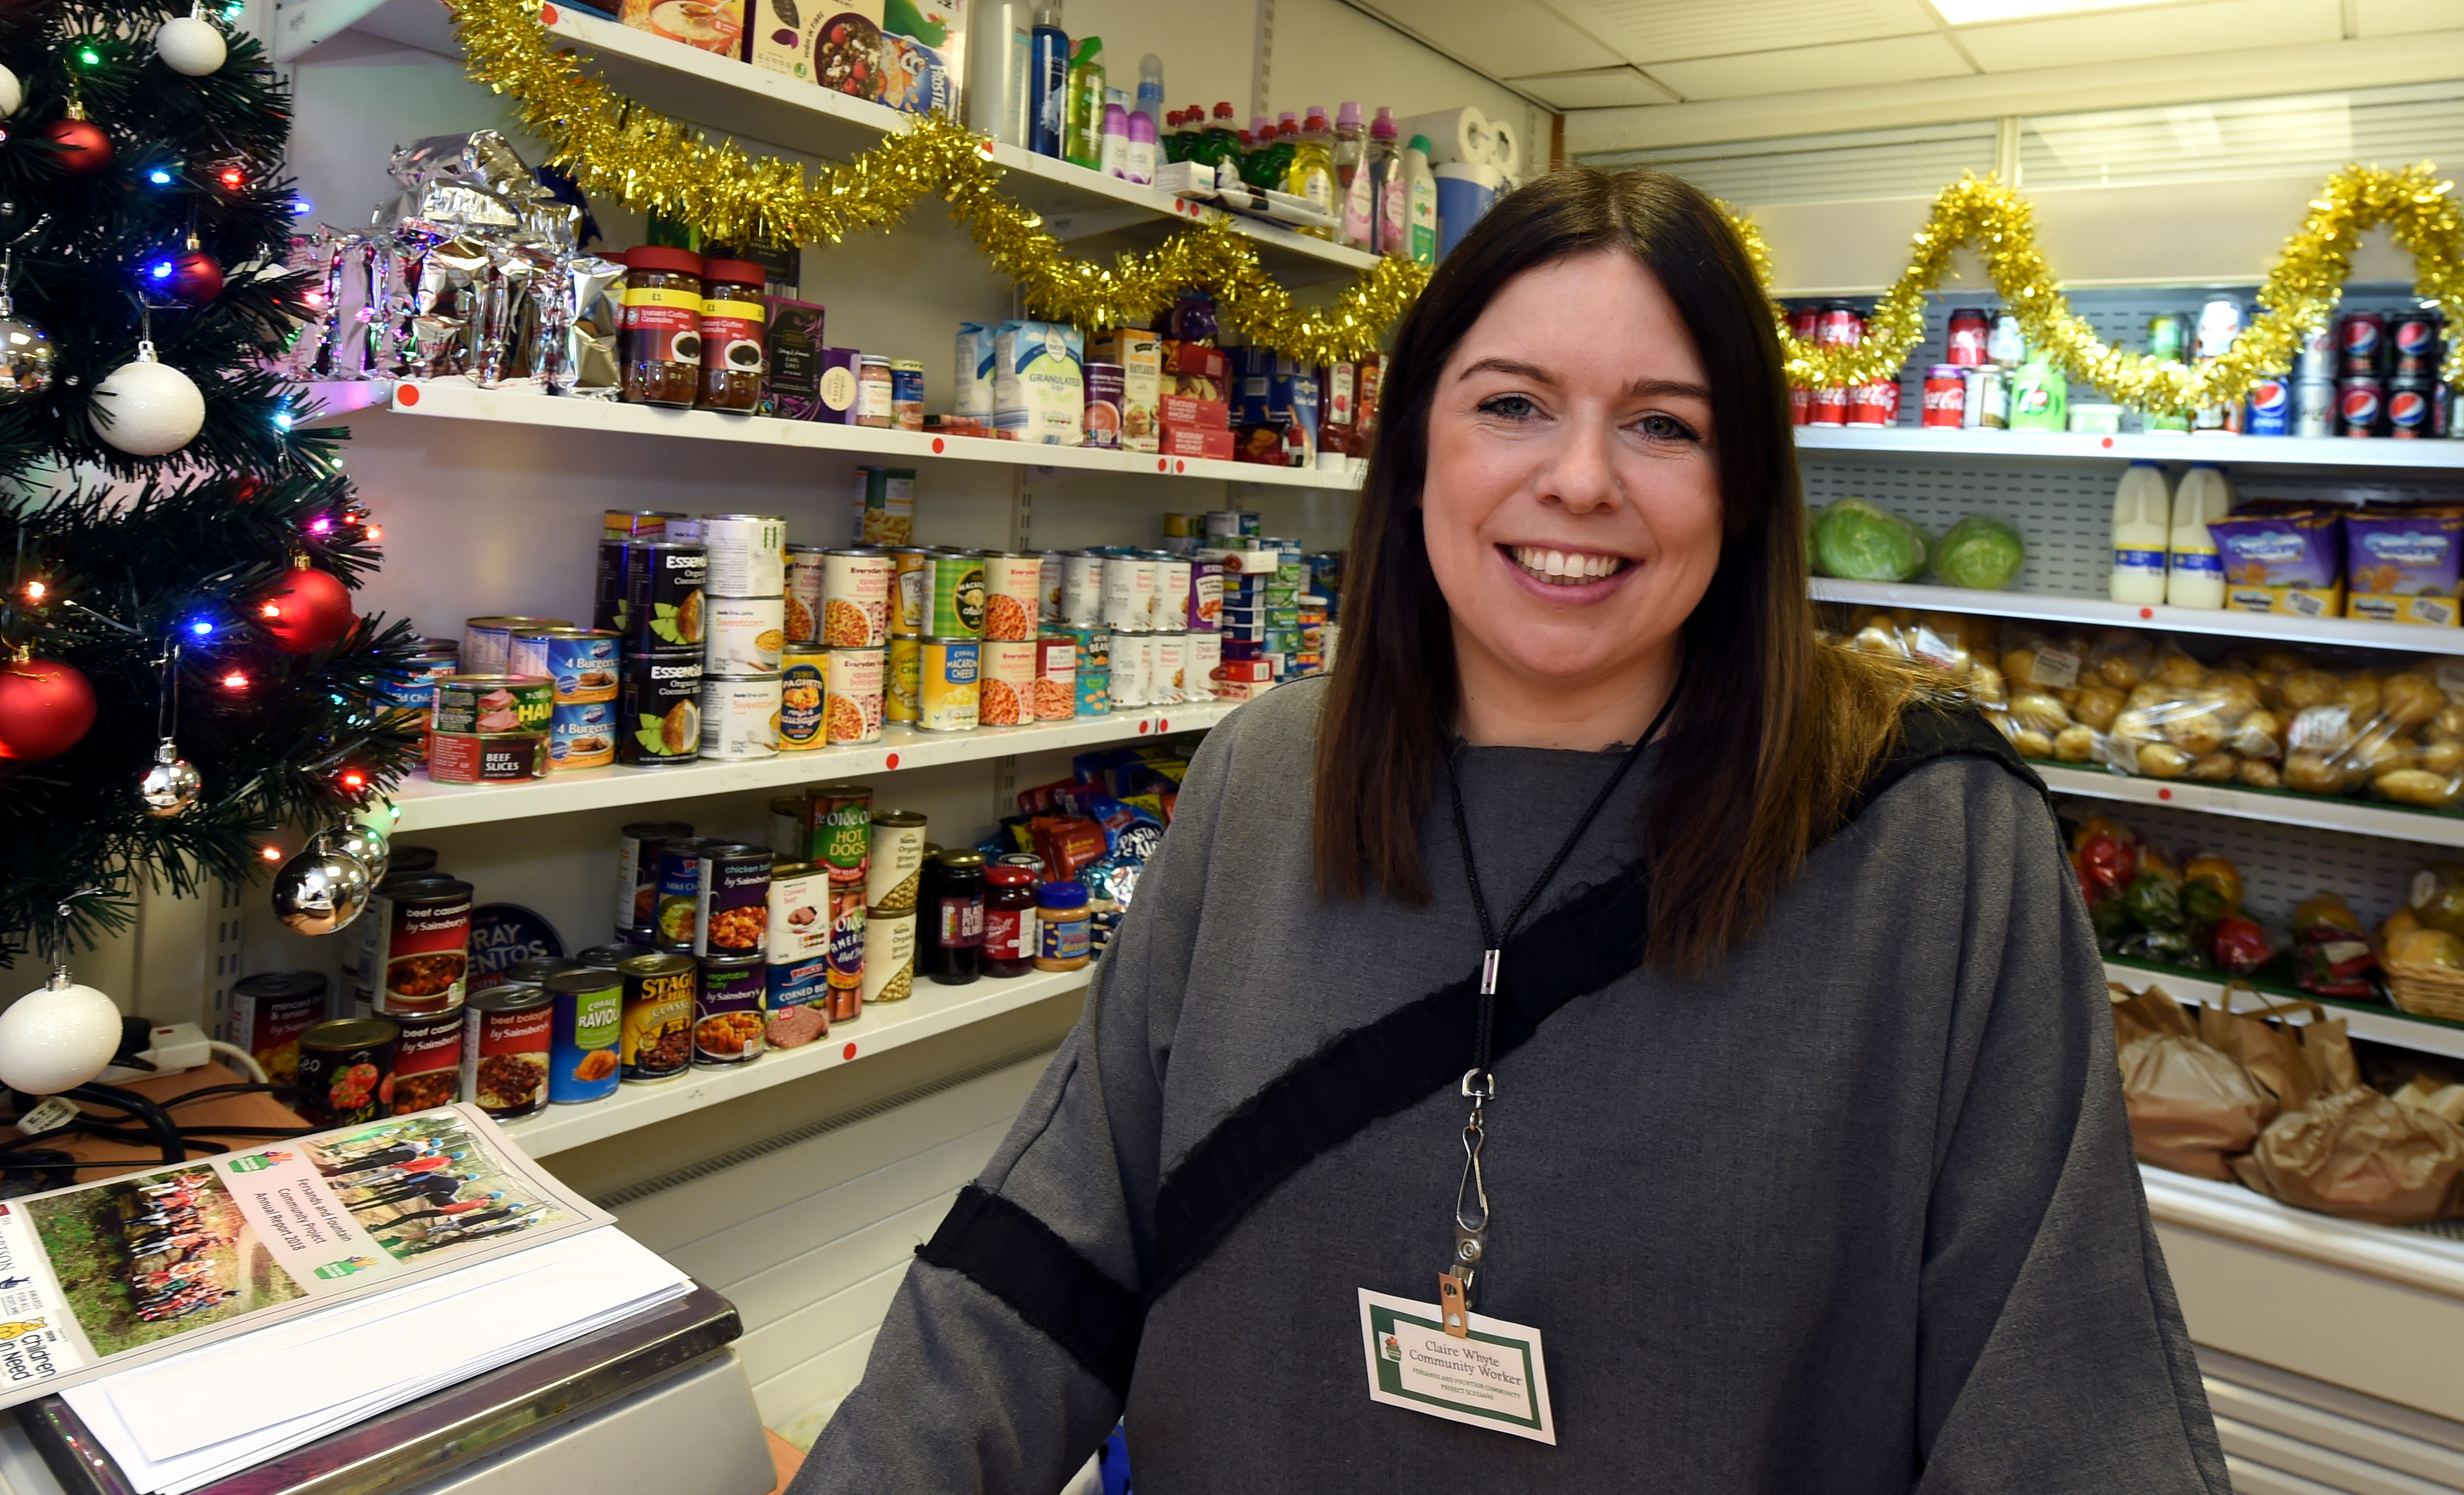 Claire Whyte, support worker at the Woodside Pantry project